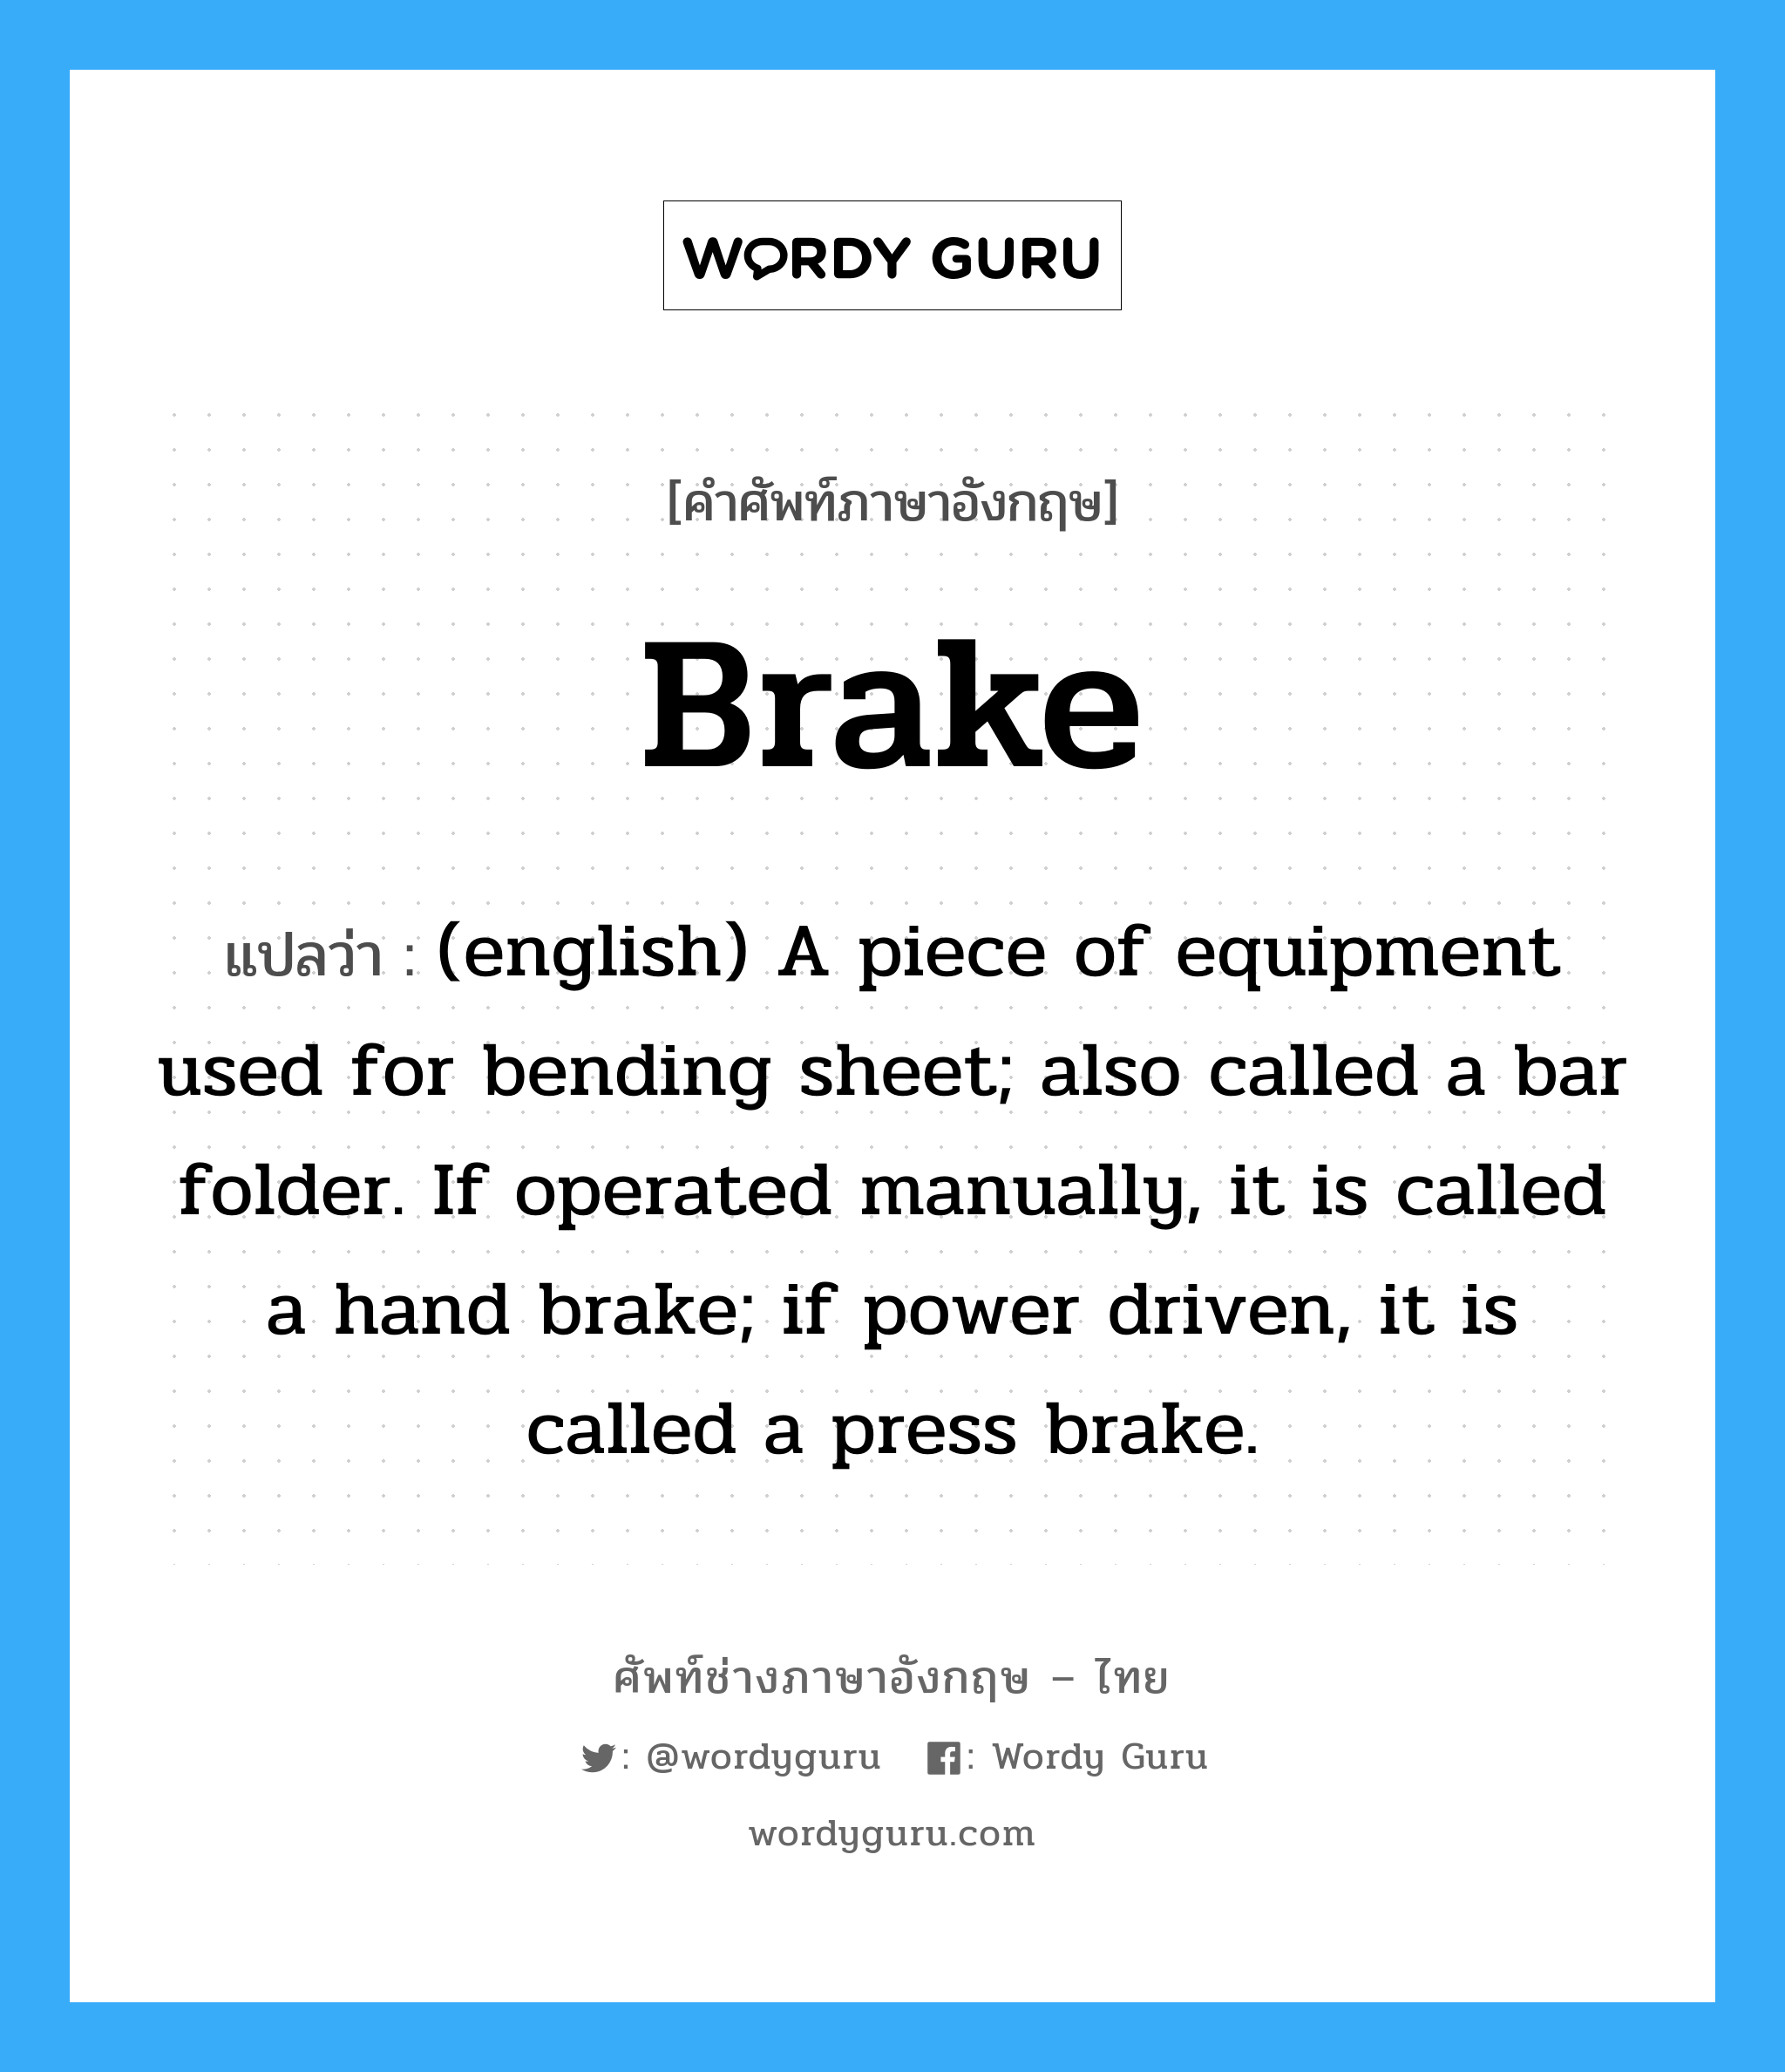 (english) A piece of equipment used for bending sheet; also called a bar folder. If operated manually, it is called a hand brake; if power driven, it is called a press brake. ภาษาอังกฤษ?, คำศัพท์ช่างภาษาอังกฤษ - ไทย (english) A piece of equipment used for bending sheet; also called a bar folder. If operated manually, it is called a hand brake; if power driven, it is called a press brake. คำศัพท์ภาษาอังกฤษ (english) A piece of equipment used for bending sheet; also called a bar folder. If operated manually, it is called a hand brake; if power driven, it is called a press brake. แปลว่า Brake